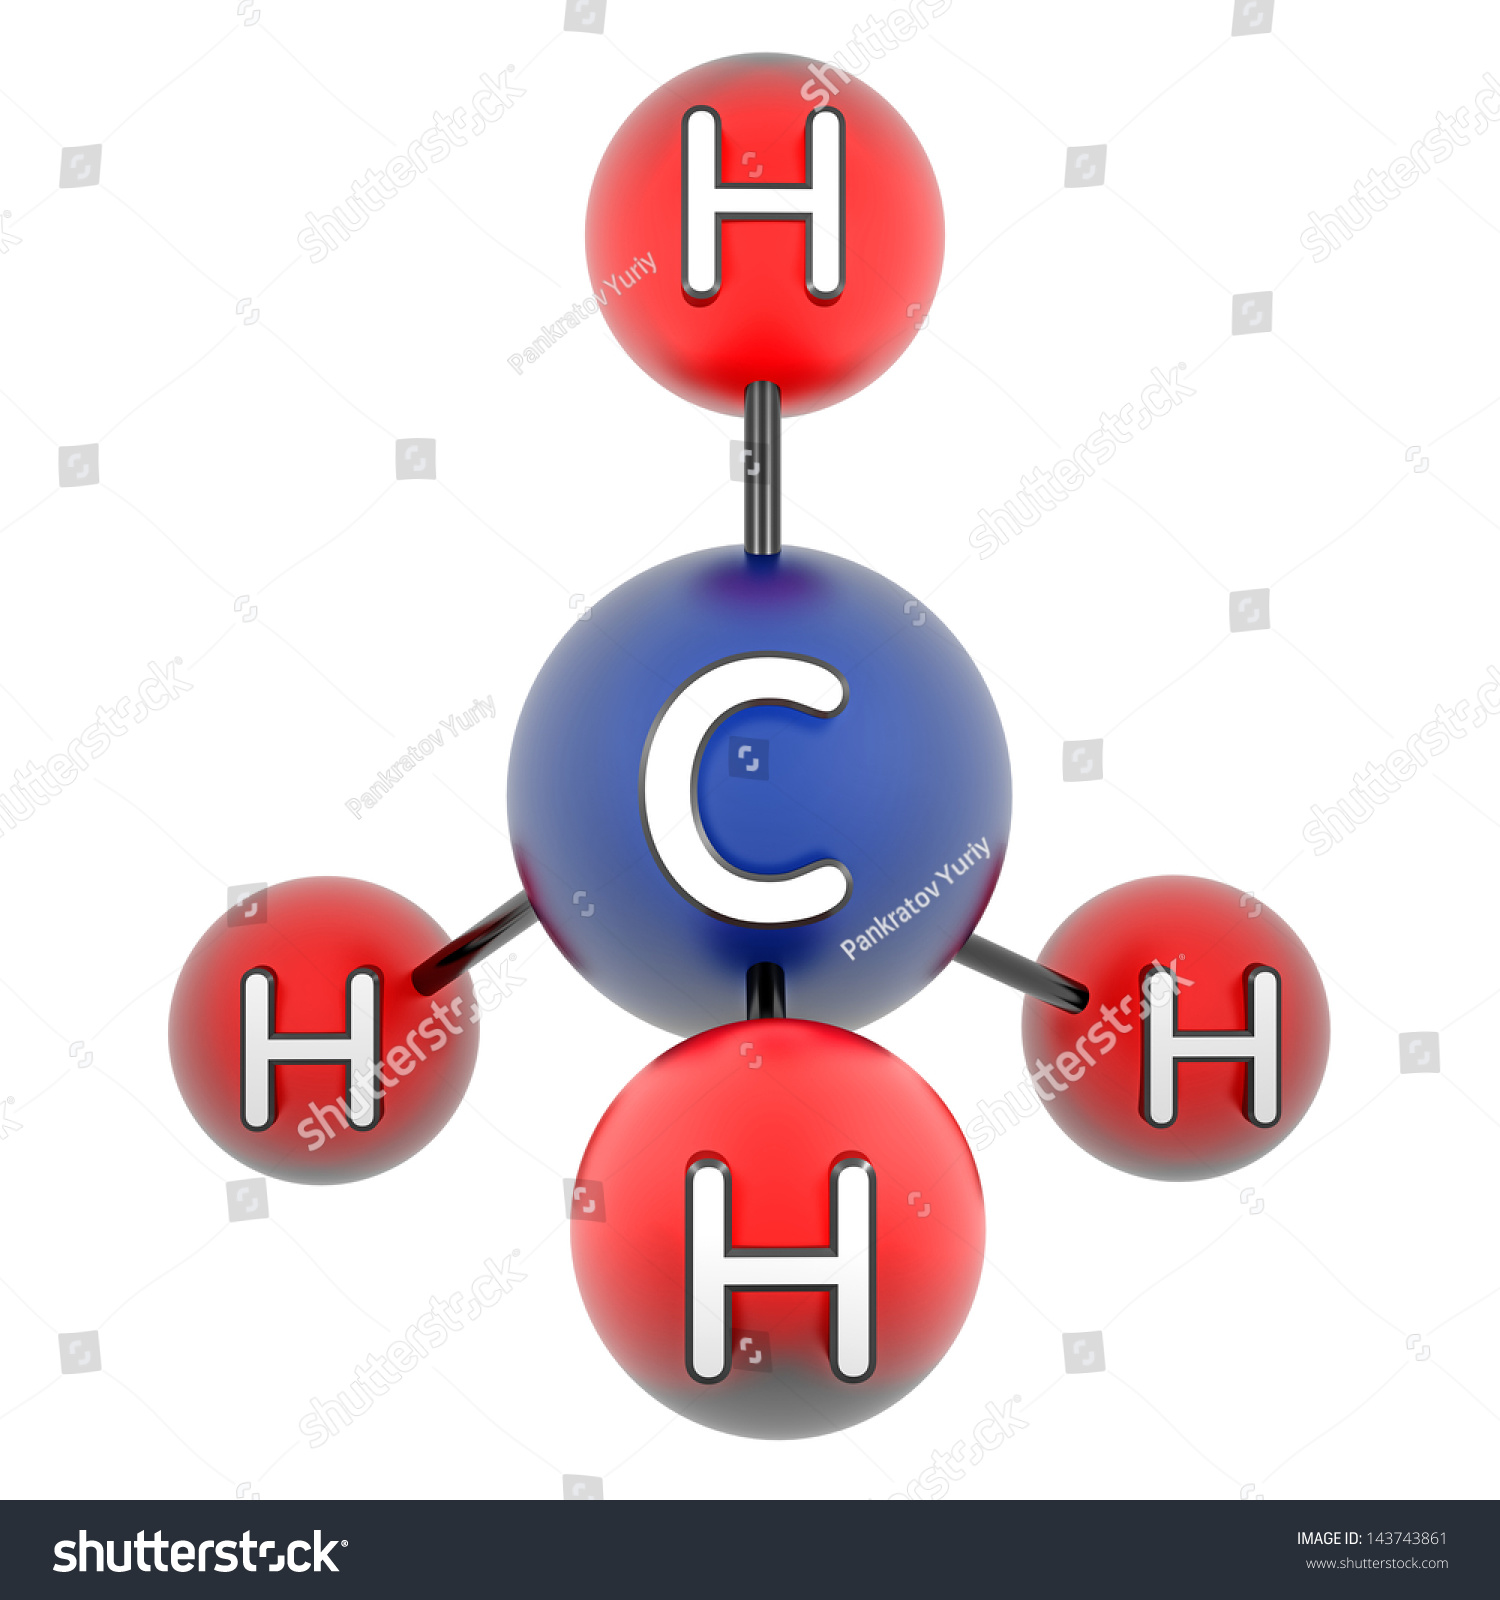 Ch4. Methane. Methanum. 3d Model. Isolated On White. Stock Photo ...